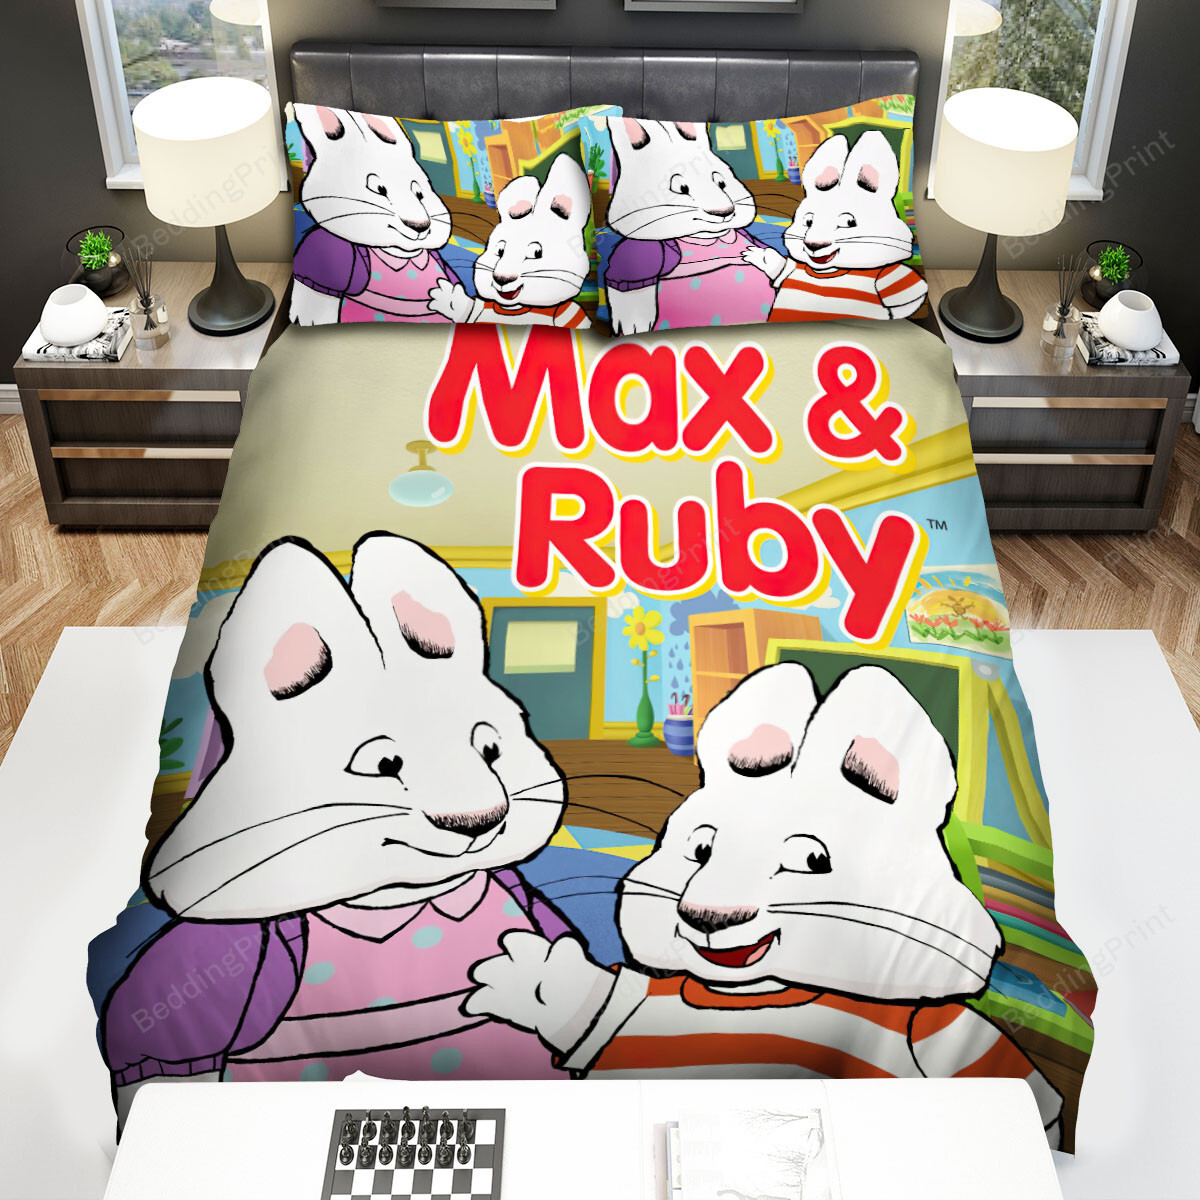 Max & Ruby In Family Photo Bed Sheets Spread Duvet Cover Bedding Sets